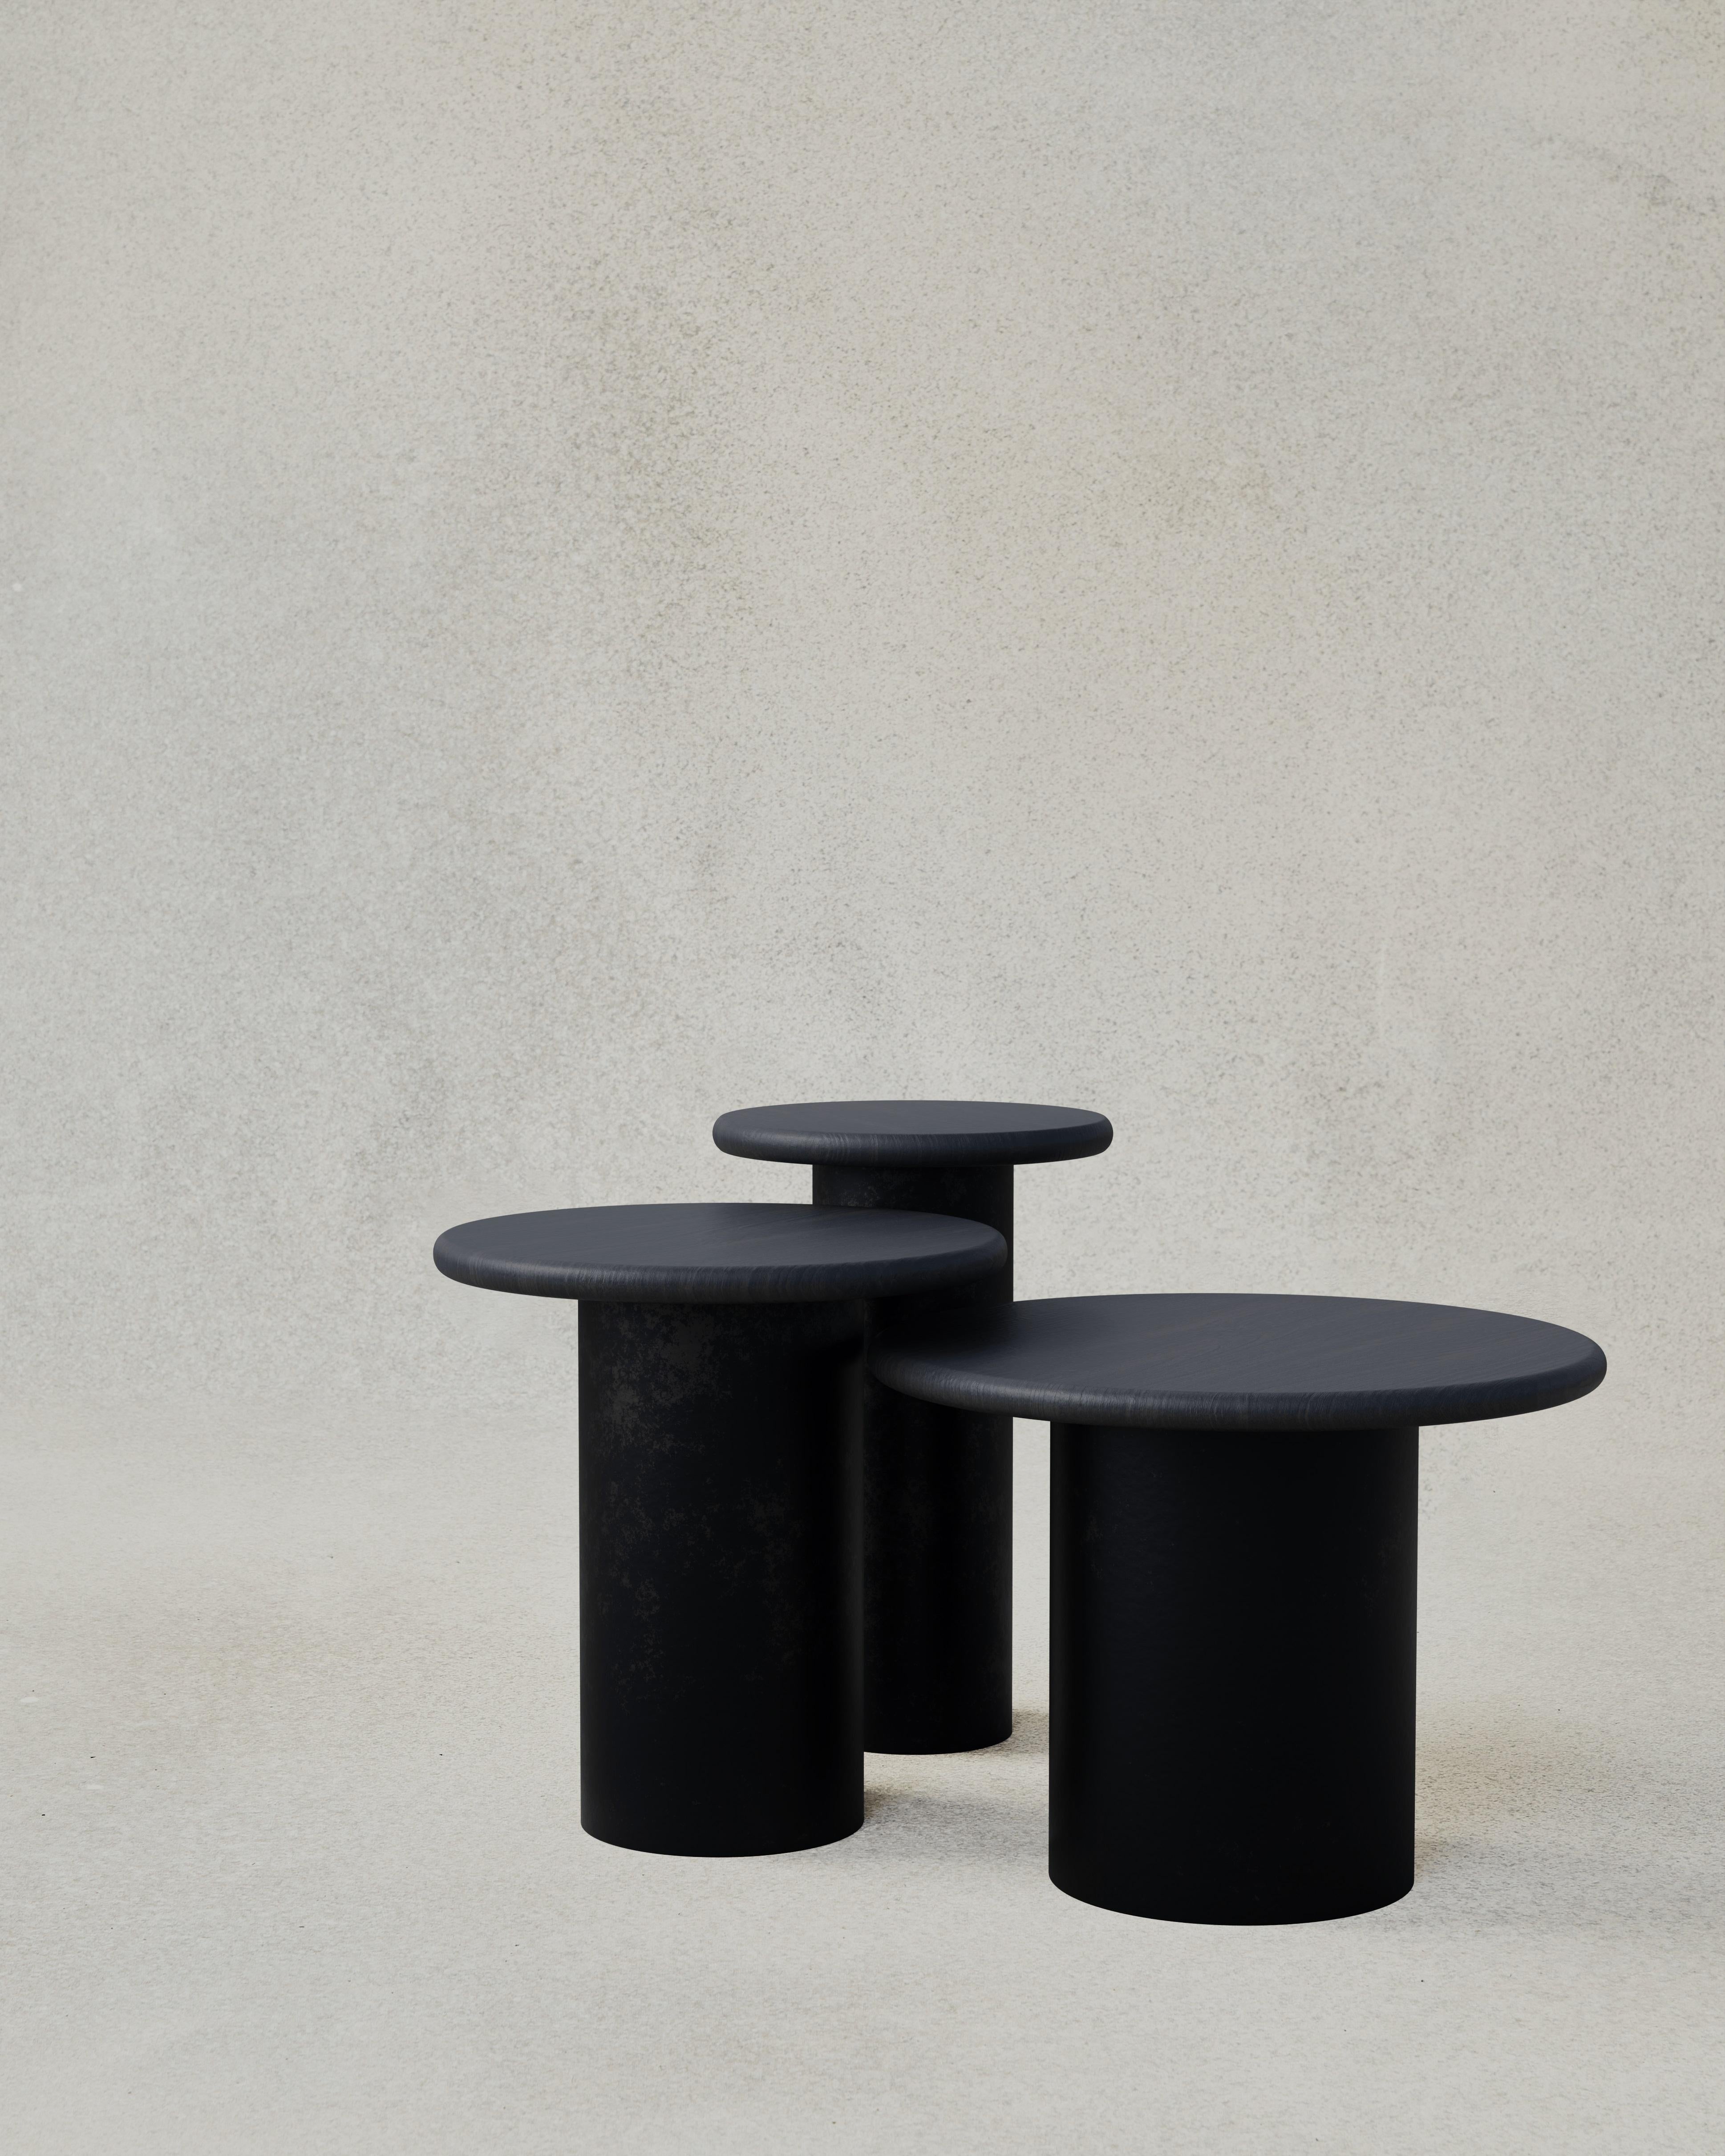 With their circular profiles, varying proportions and potential to be nested, these versatile tables evoke the pattern of raindrops in a POOL of water when placed together.

Bought as a set of 300, 400, 500, we add a 10% discount

Tops: Black